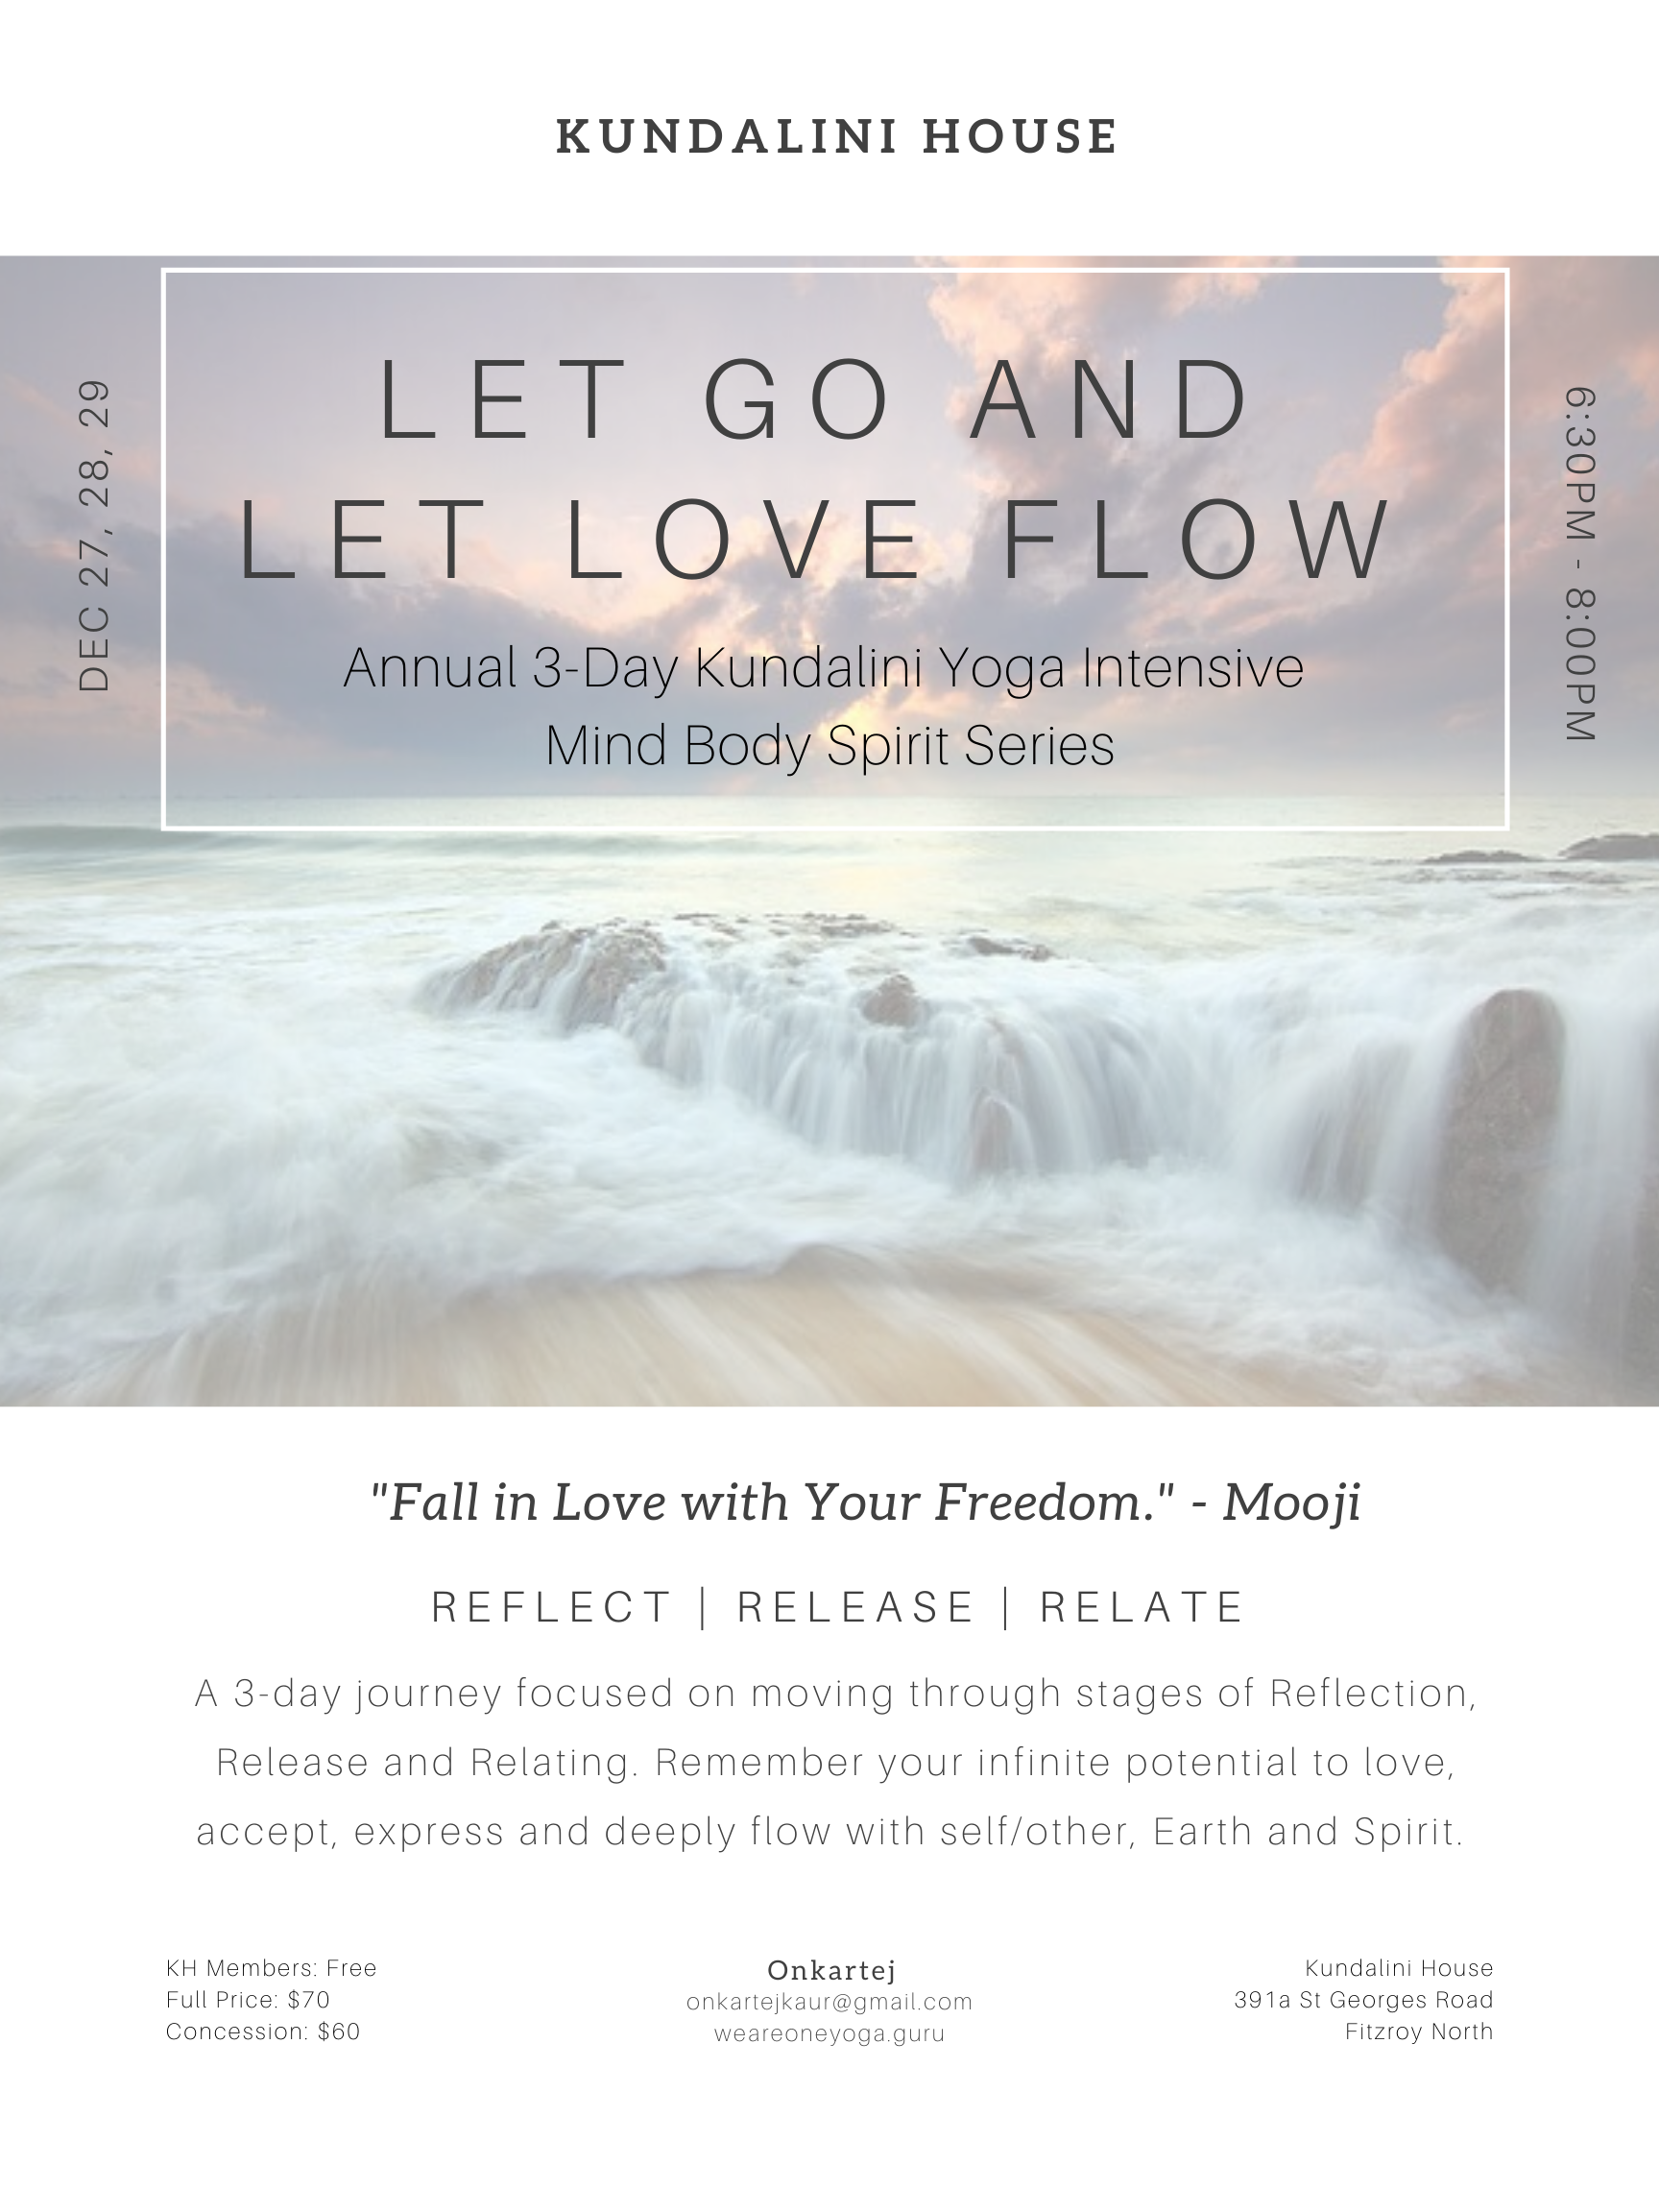 3 Day Kundalini Yoga Intensive Let Go And Let Love Flow Mind Body Spirit Series With Onkartej Kundalini House